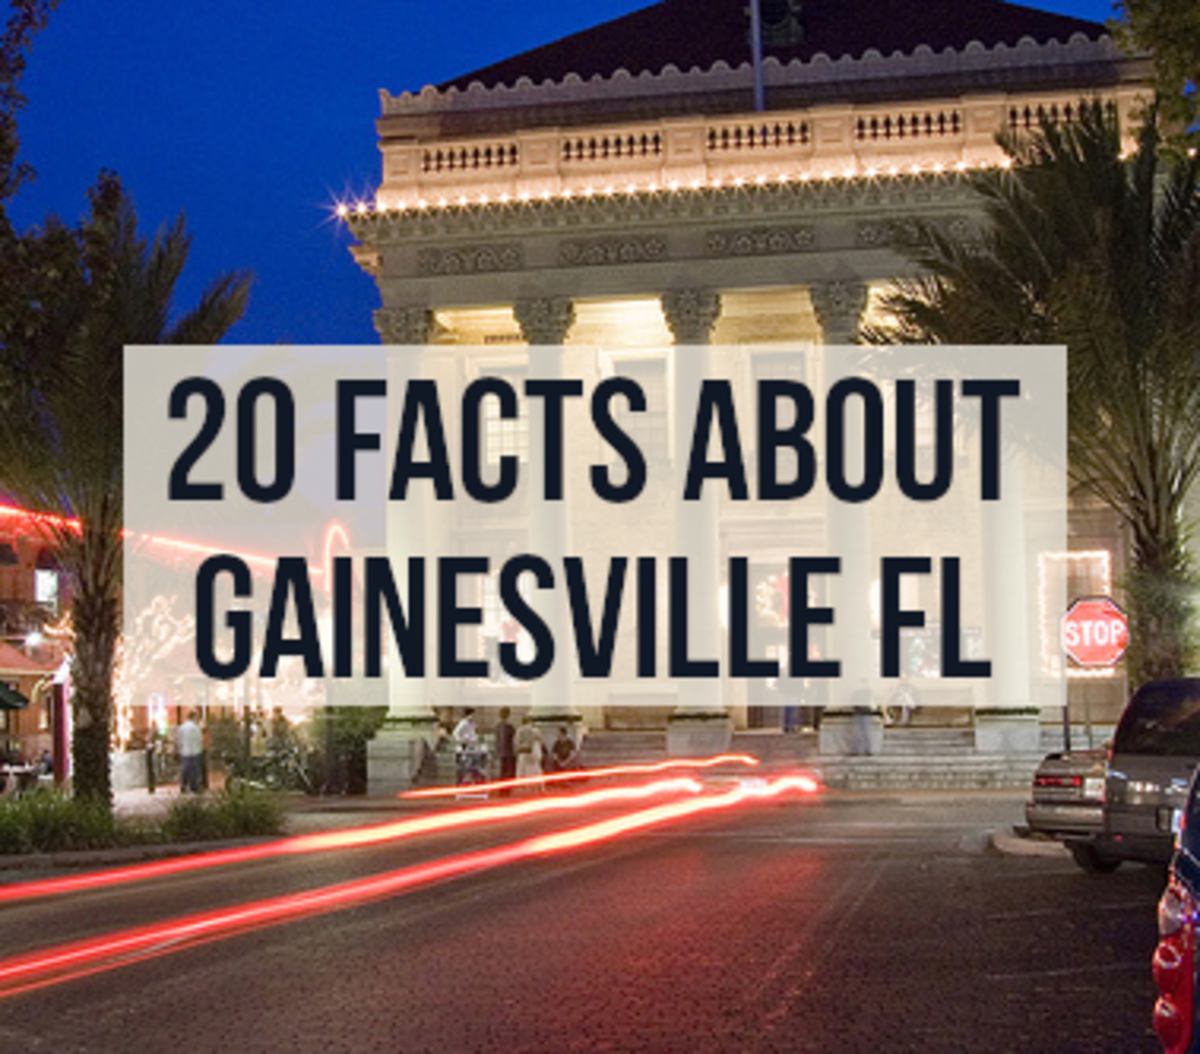 20 Facts About Gainesville, FL